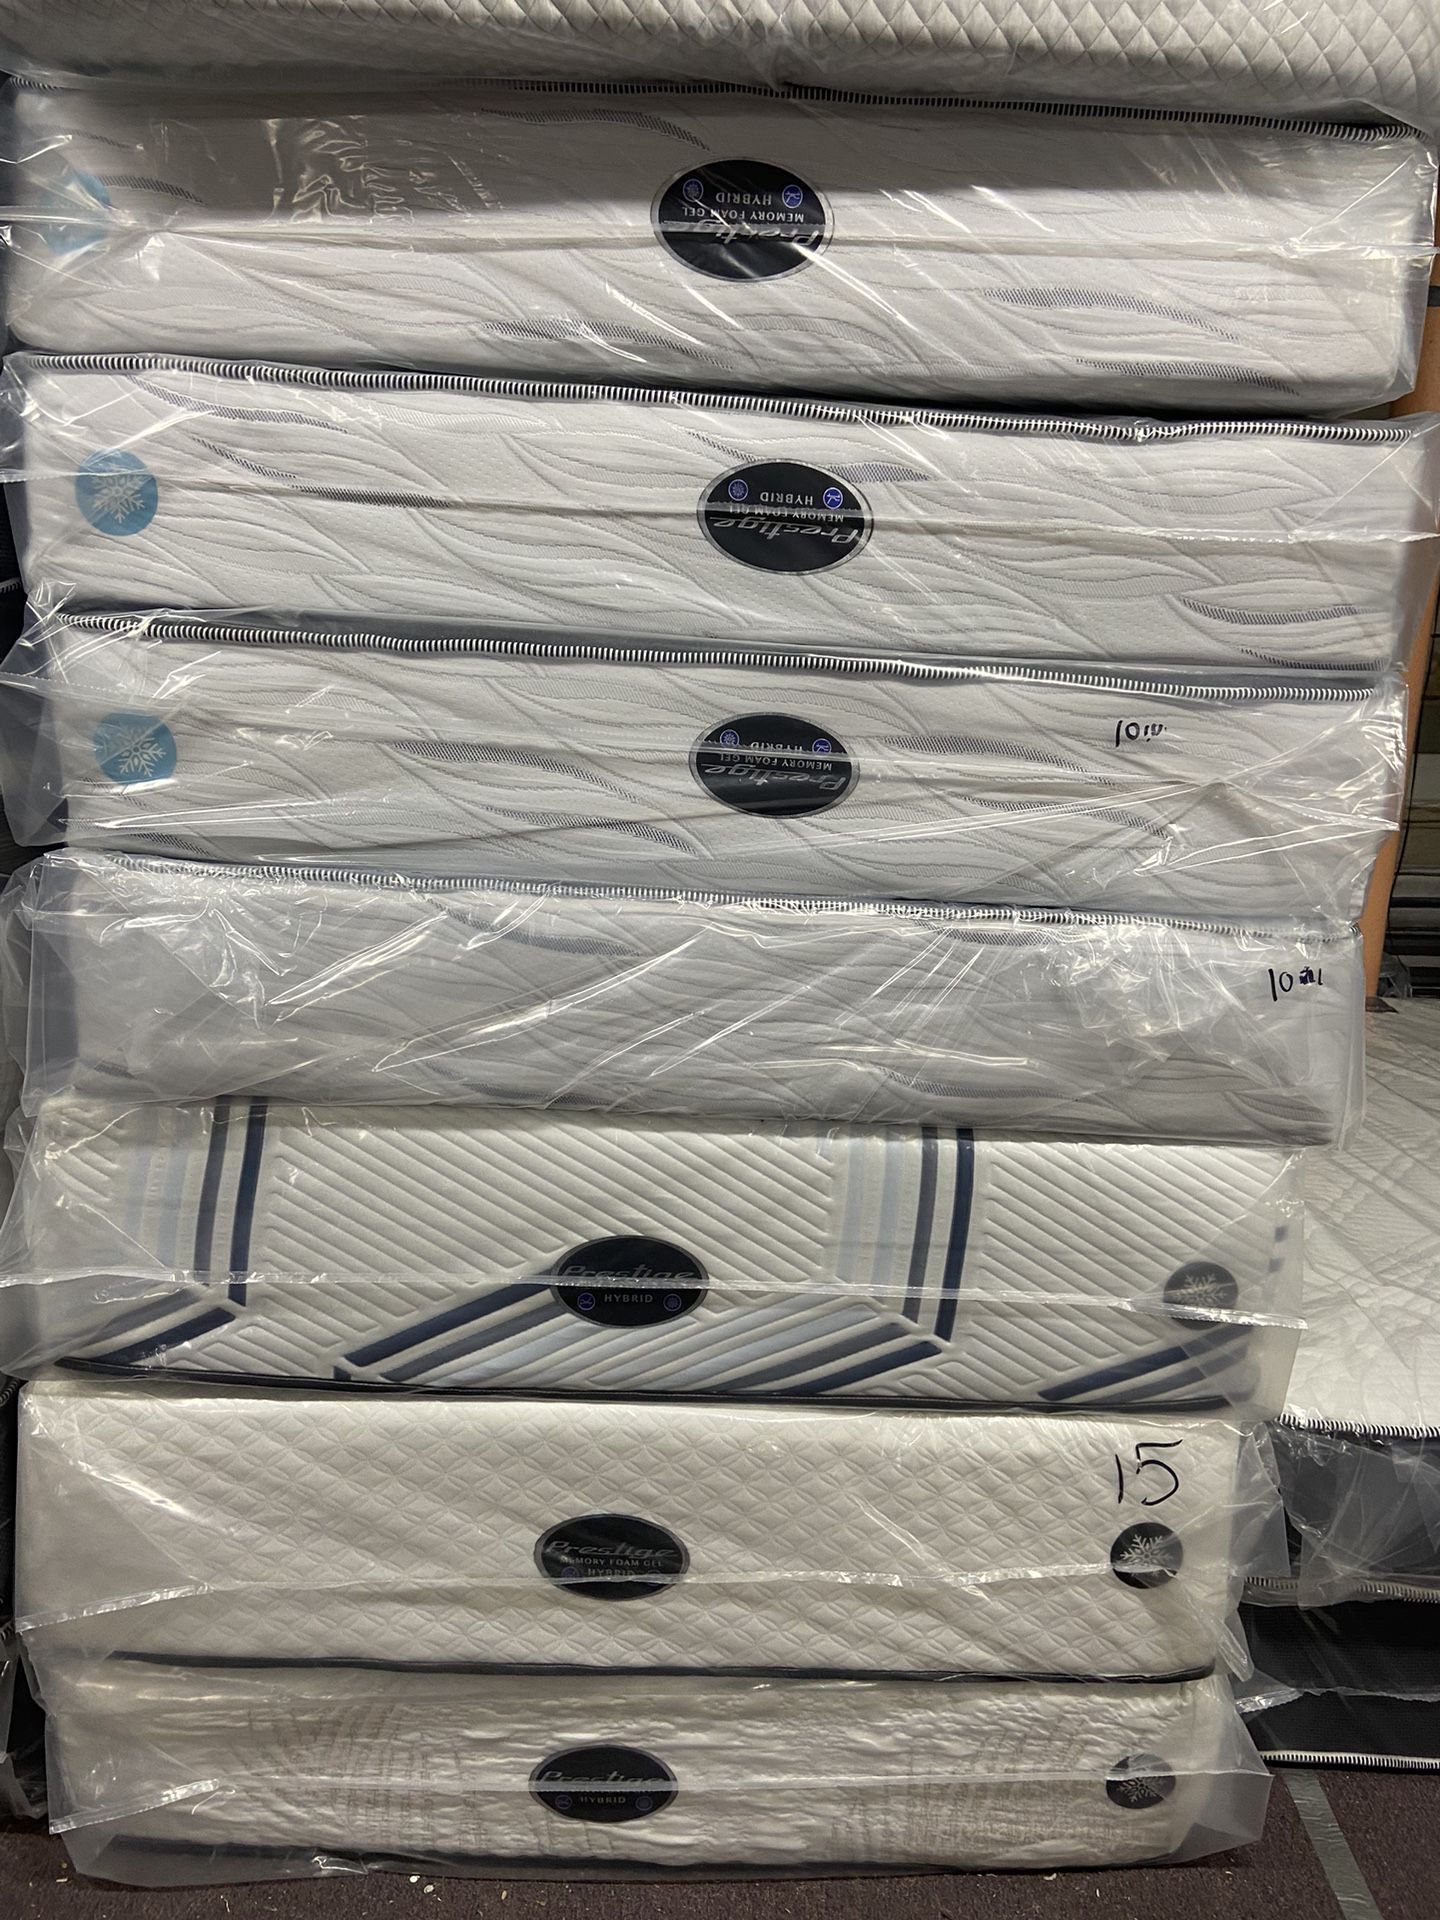 Beds All Sizes Mattress And Box Spring Available 